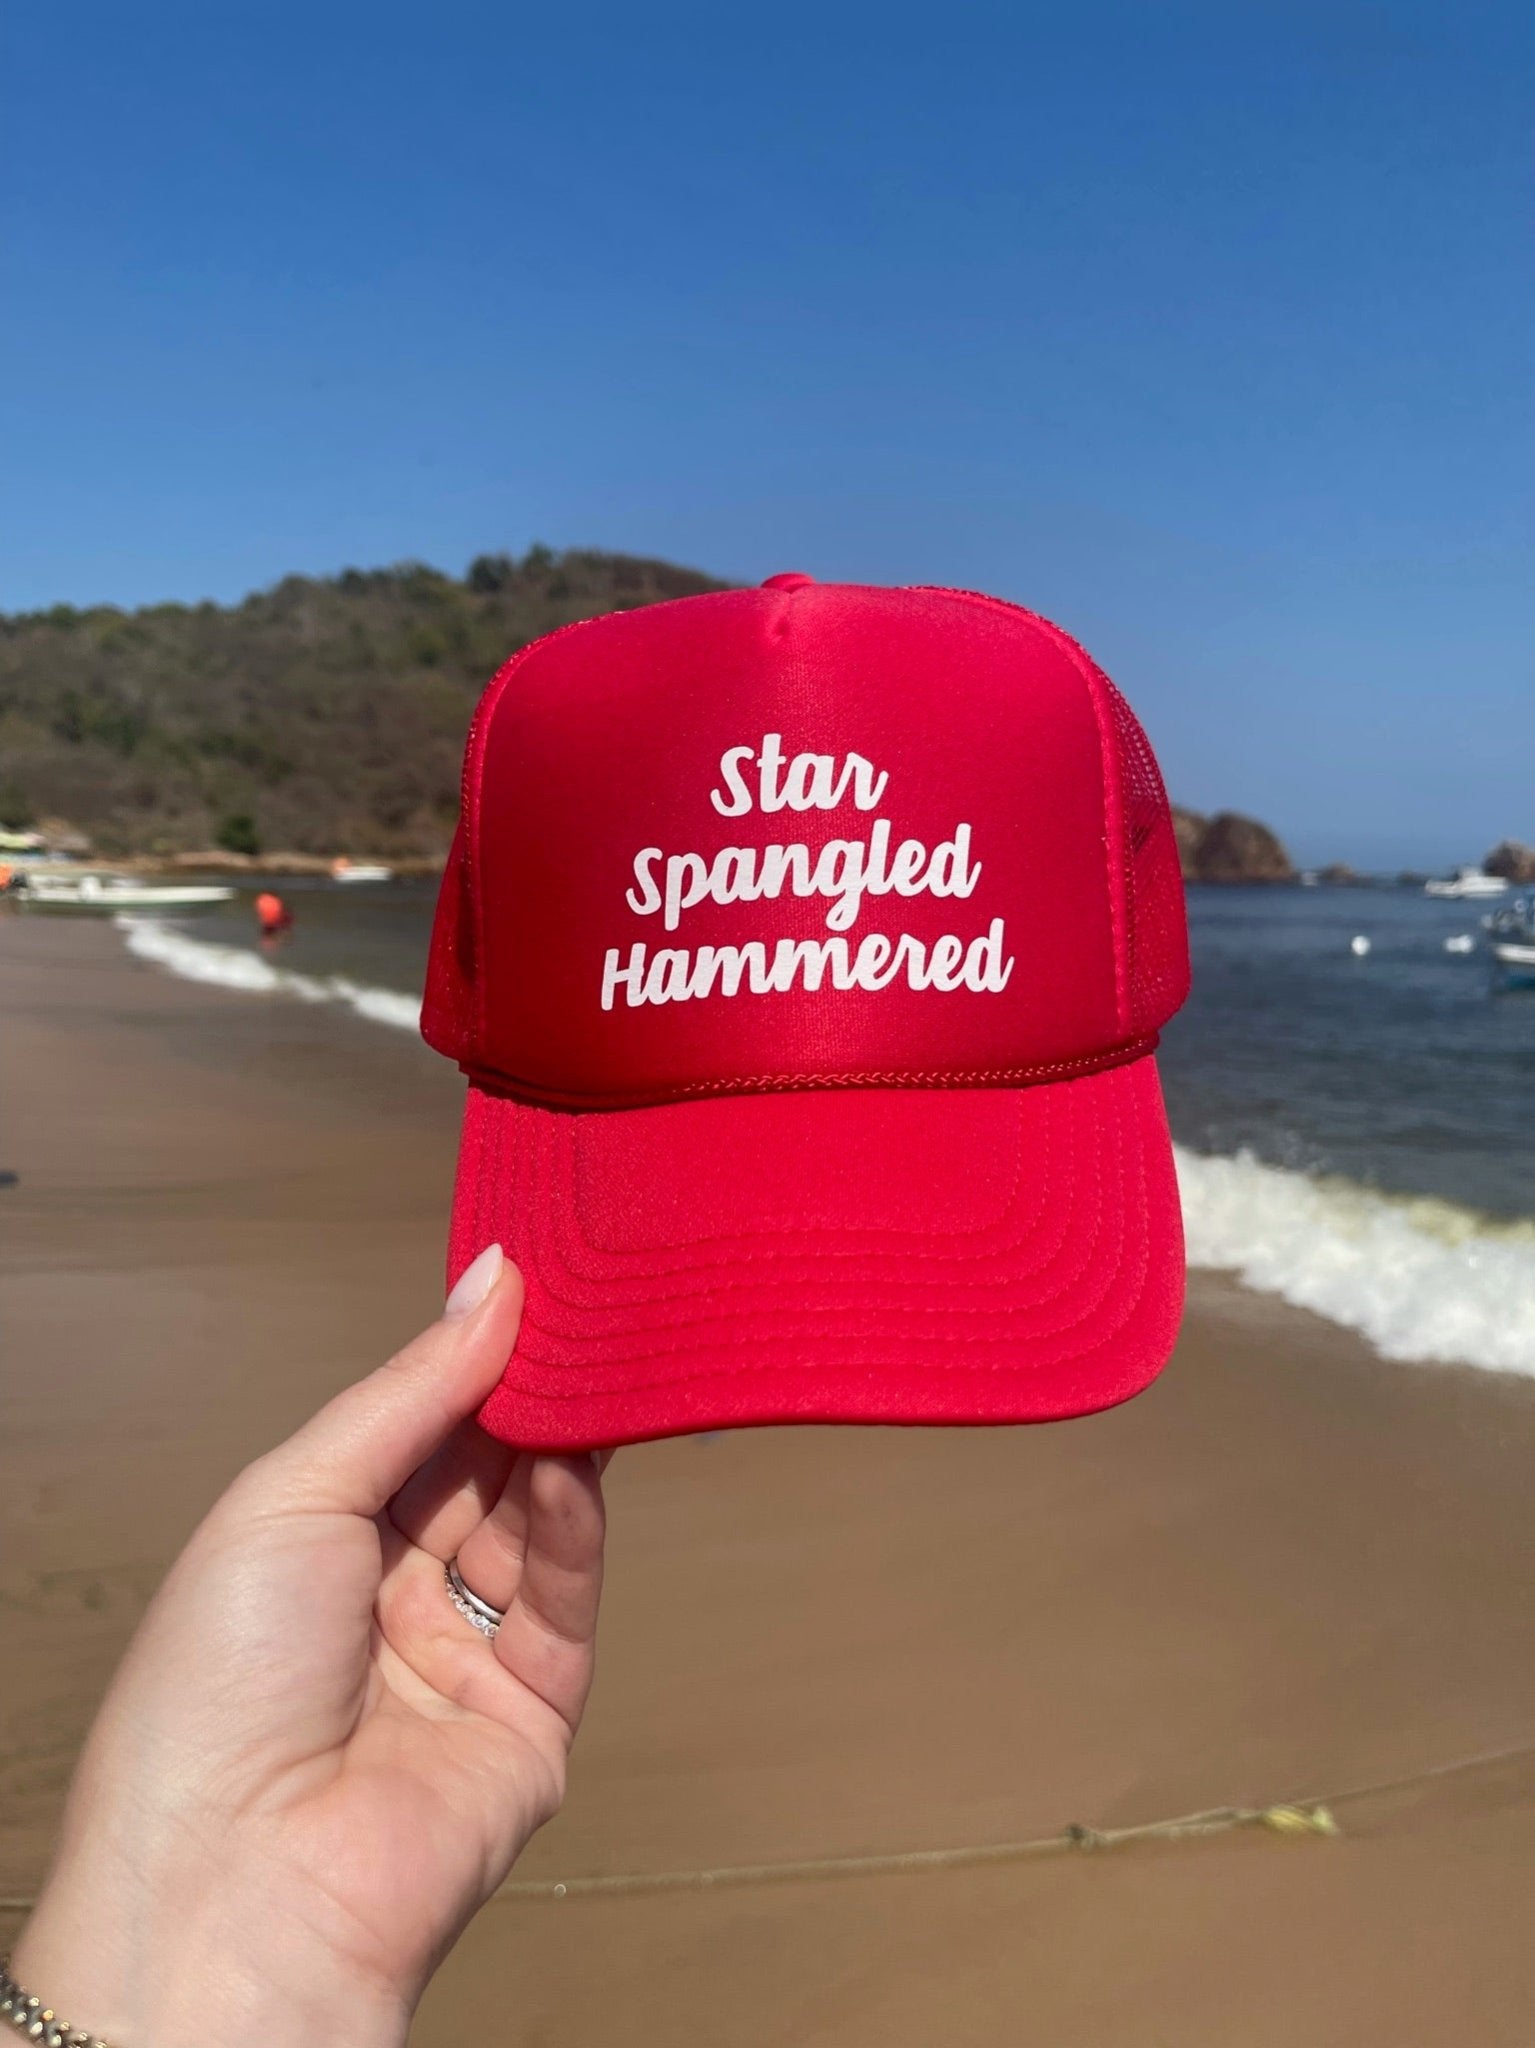 A red trucker hat reads "Star Spangled Hammered" in white script